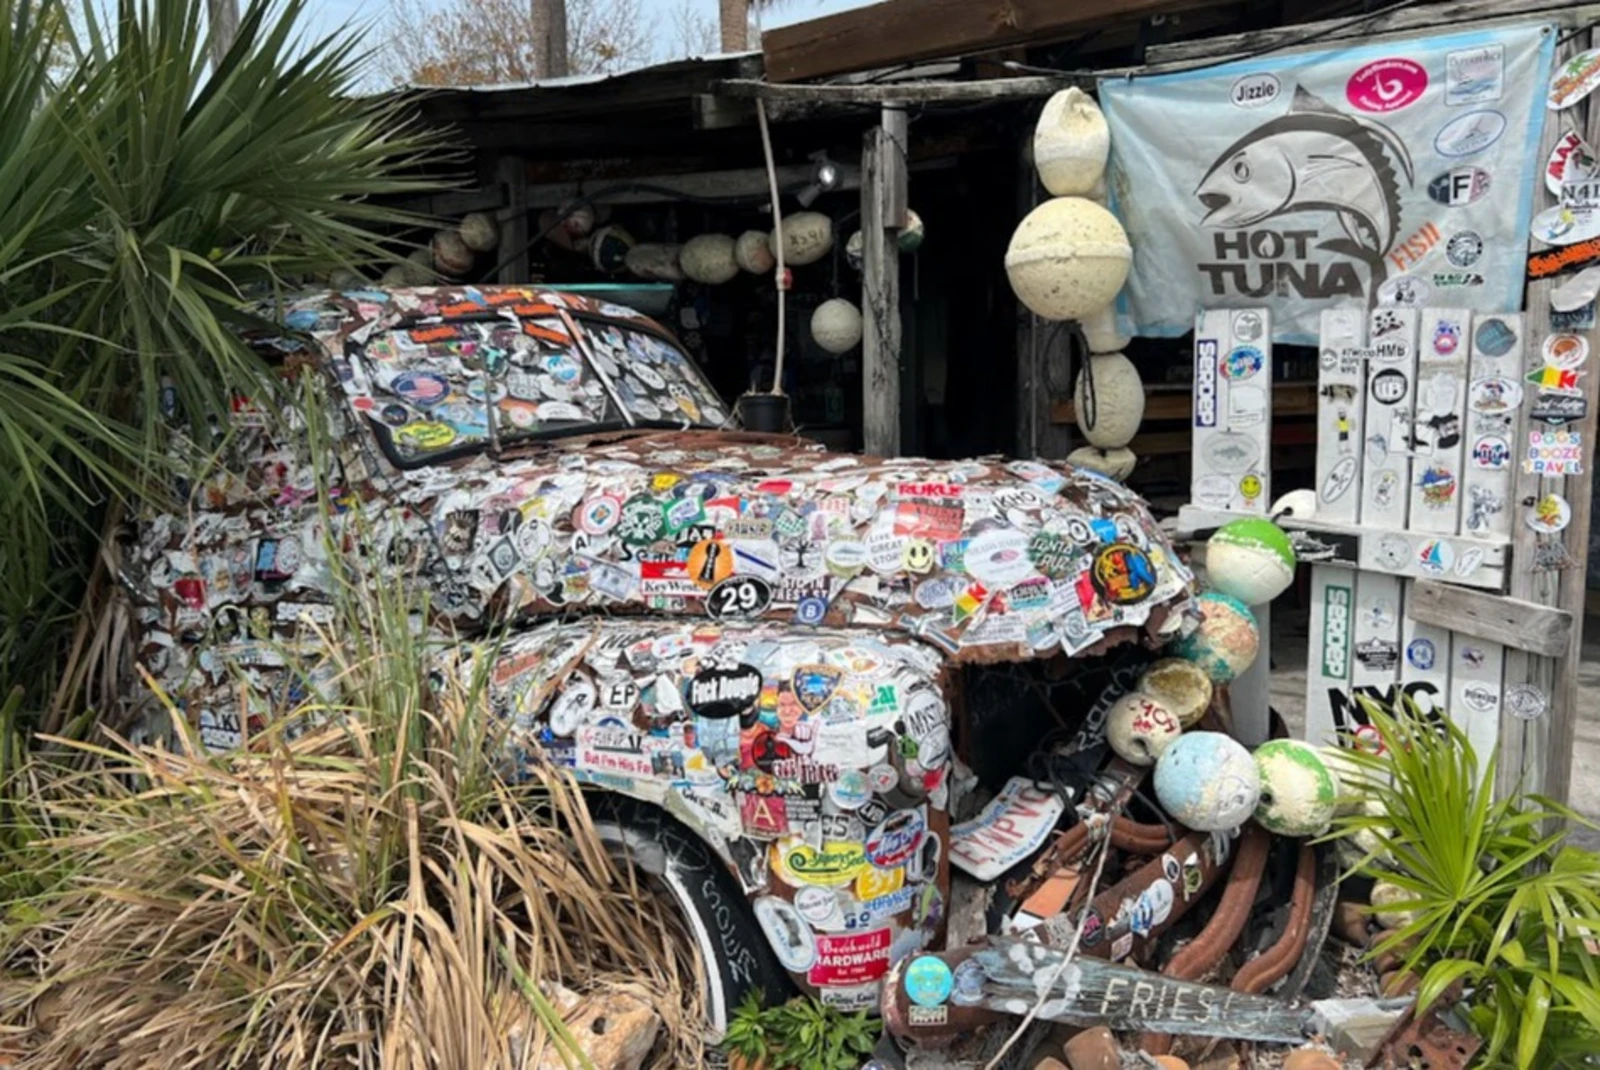 This wagon can be found at B.O.'s Fish Wagon, a seafood restaurant in Key West.